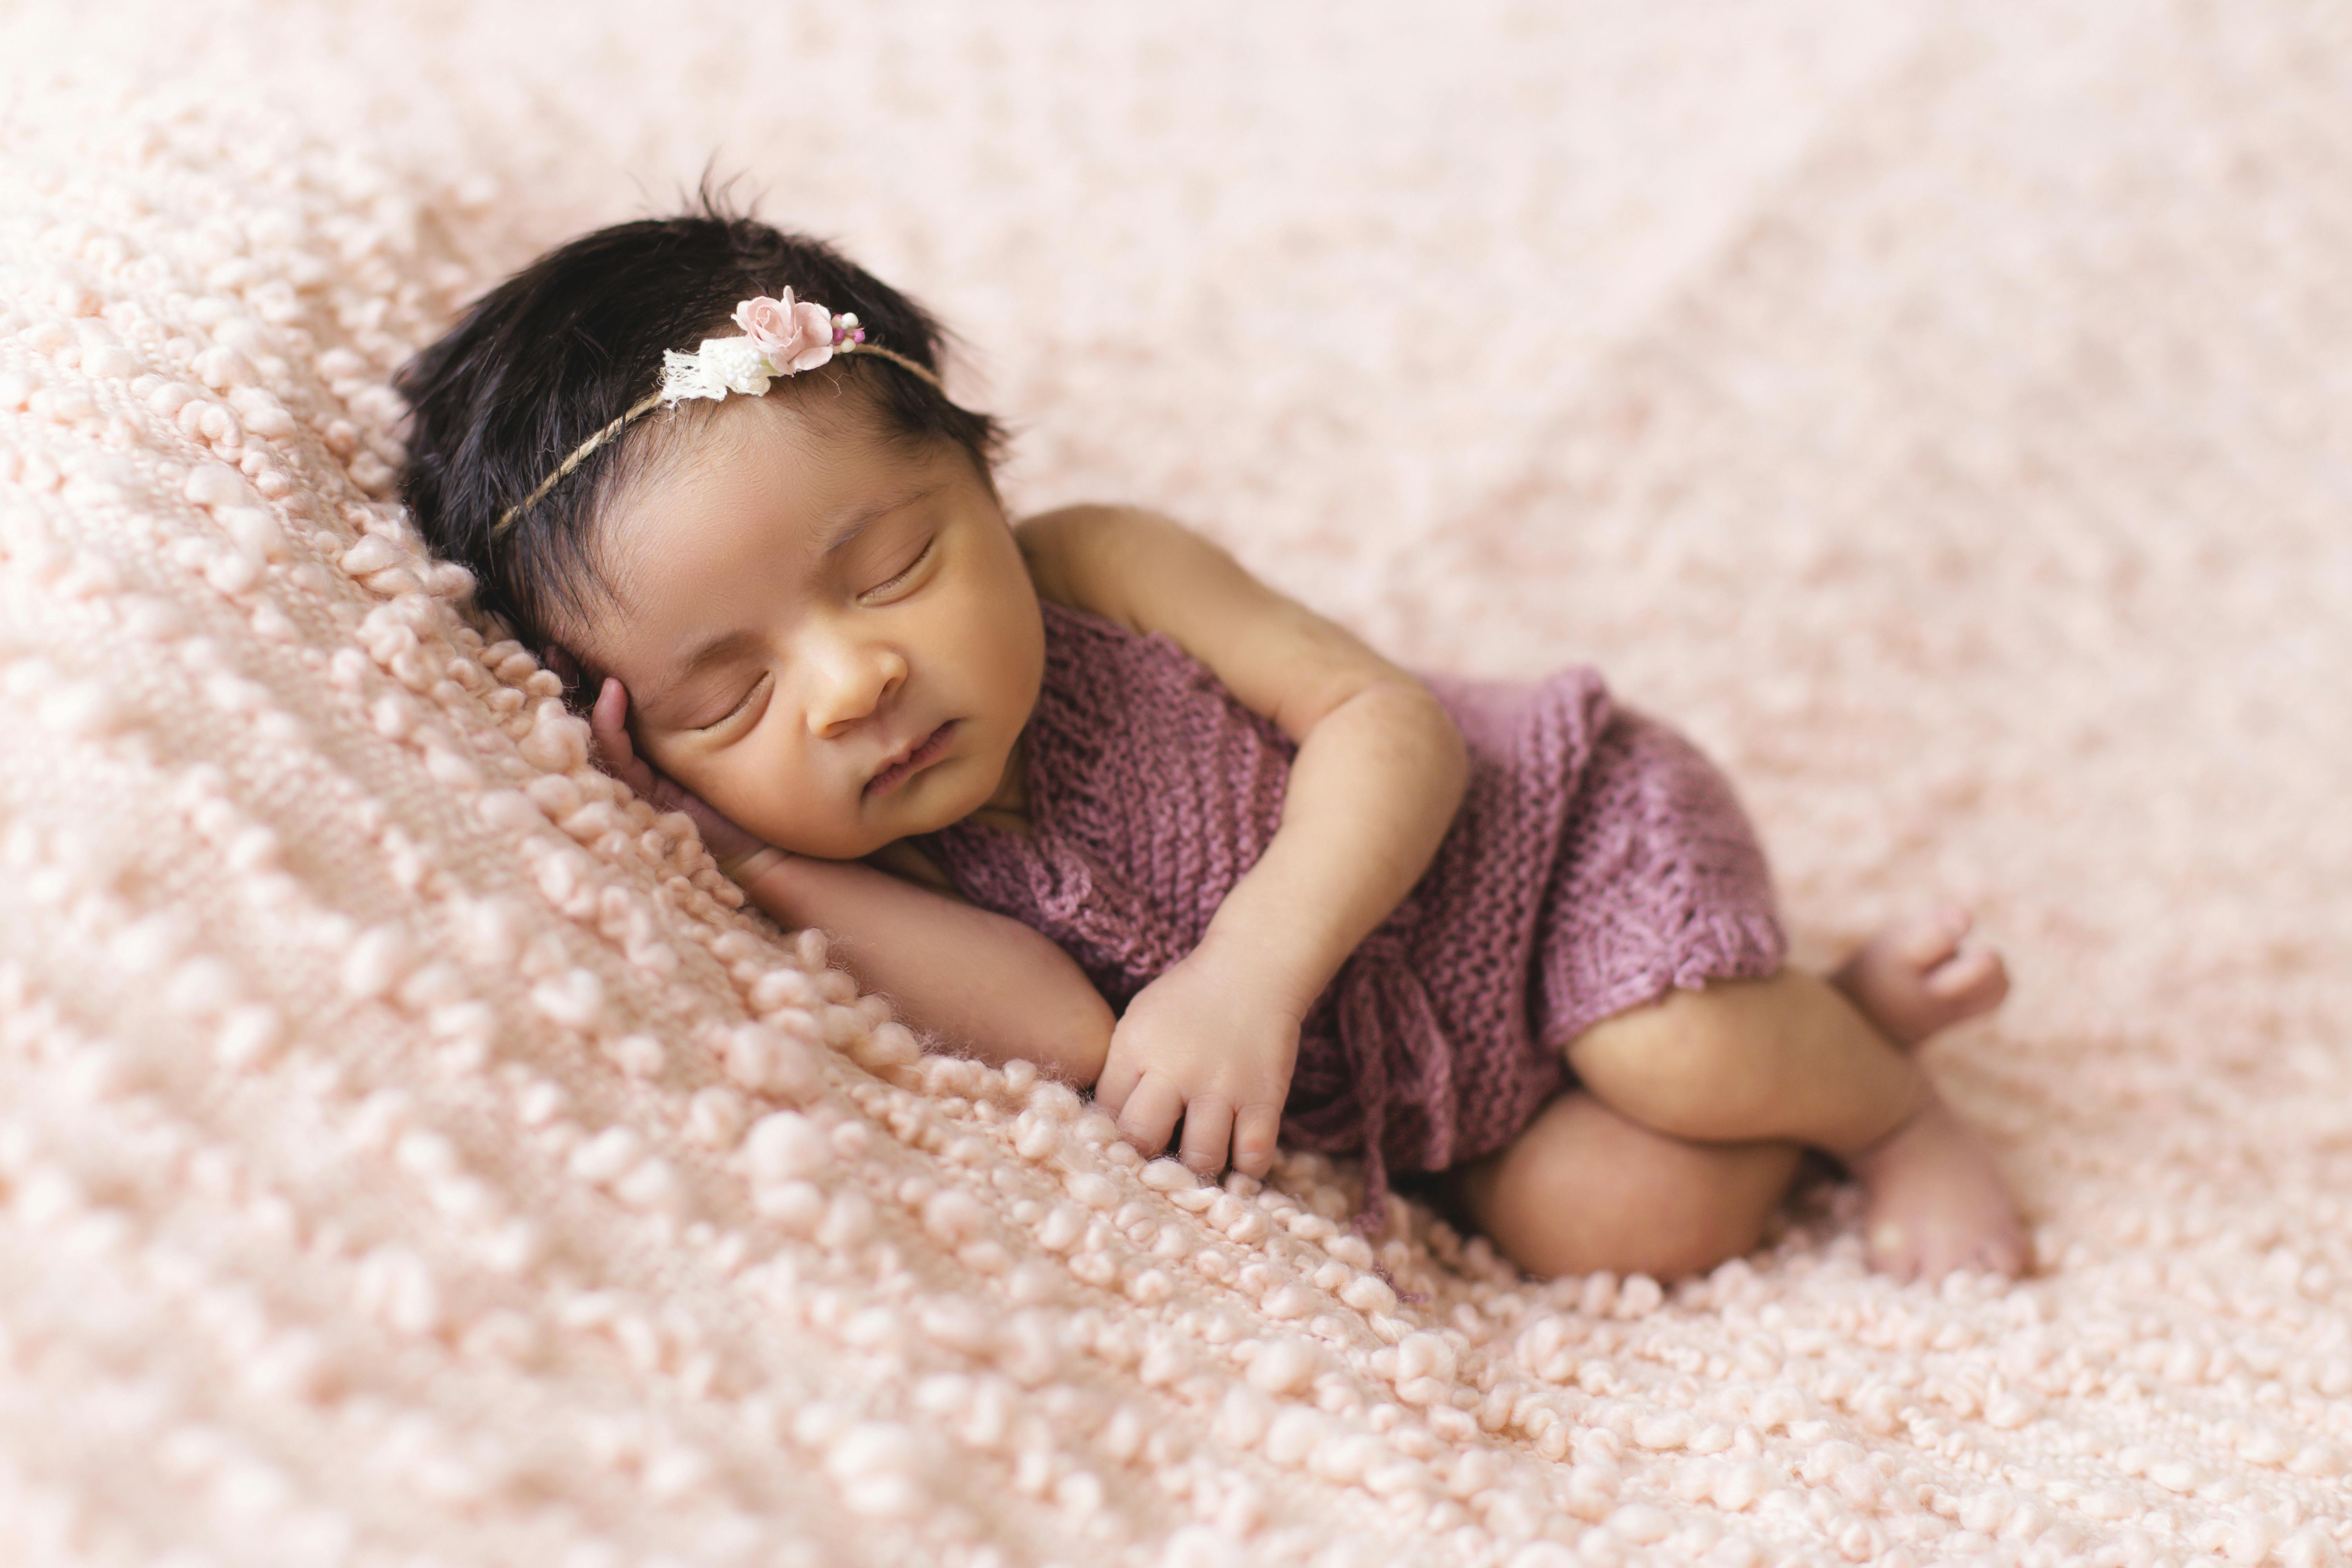 Baby Girl Photos, Download The BEST Free Baby Girl Stock Photos & HD Images